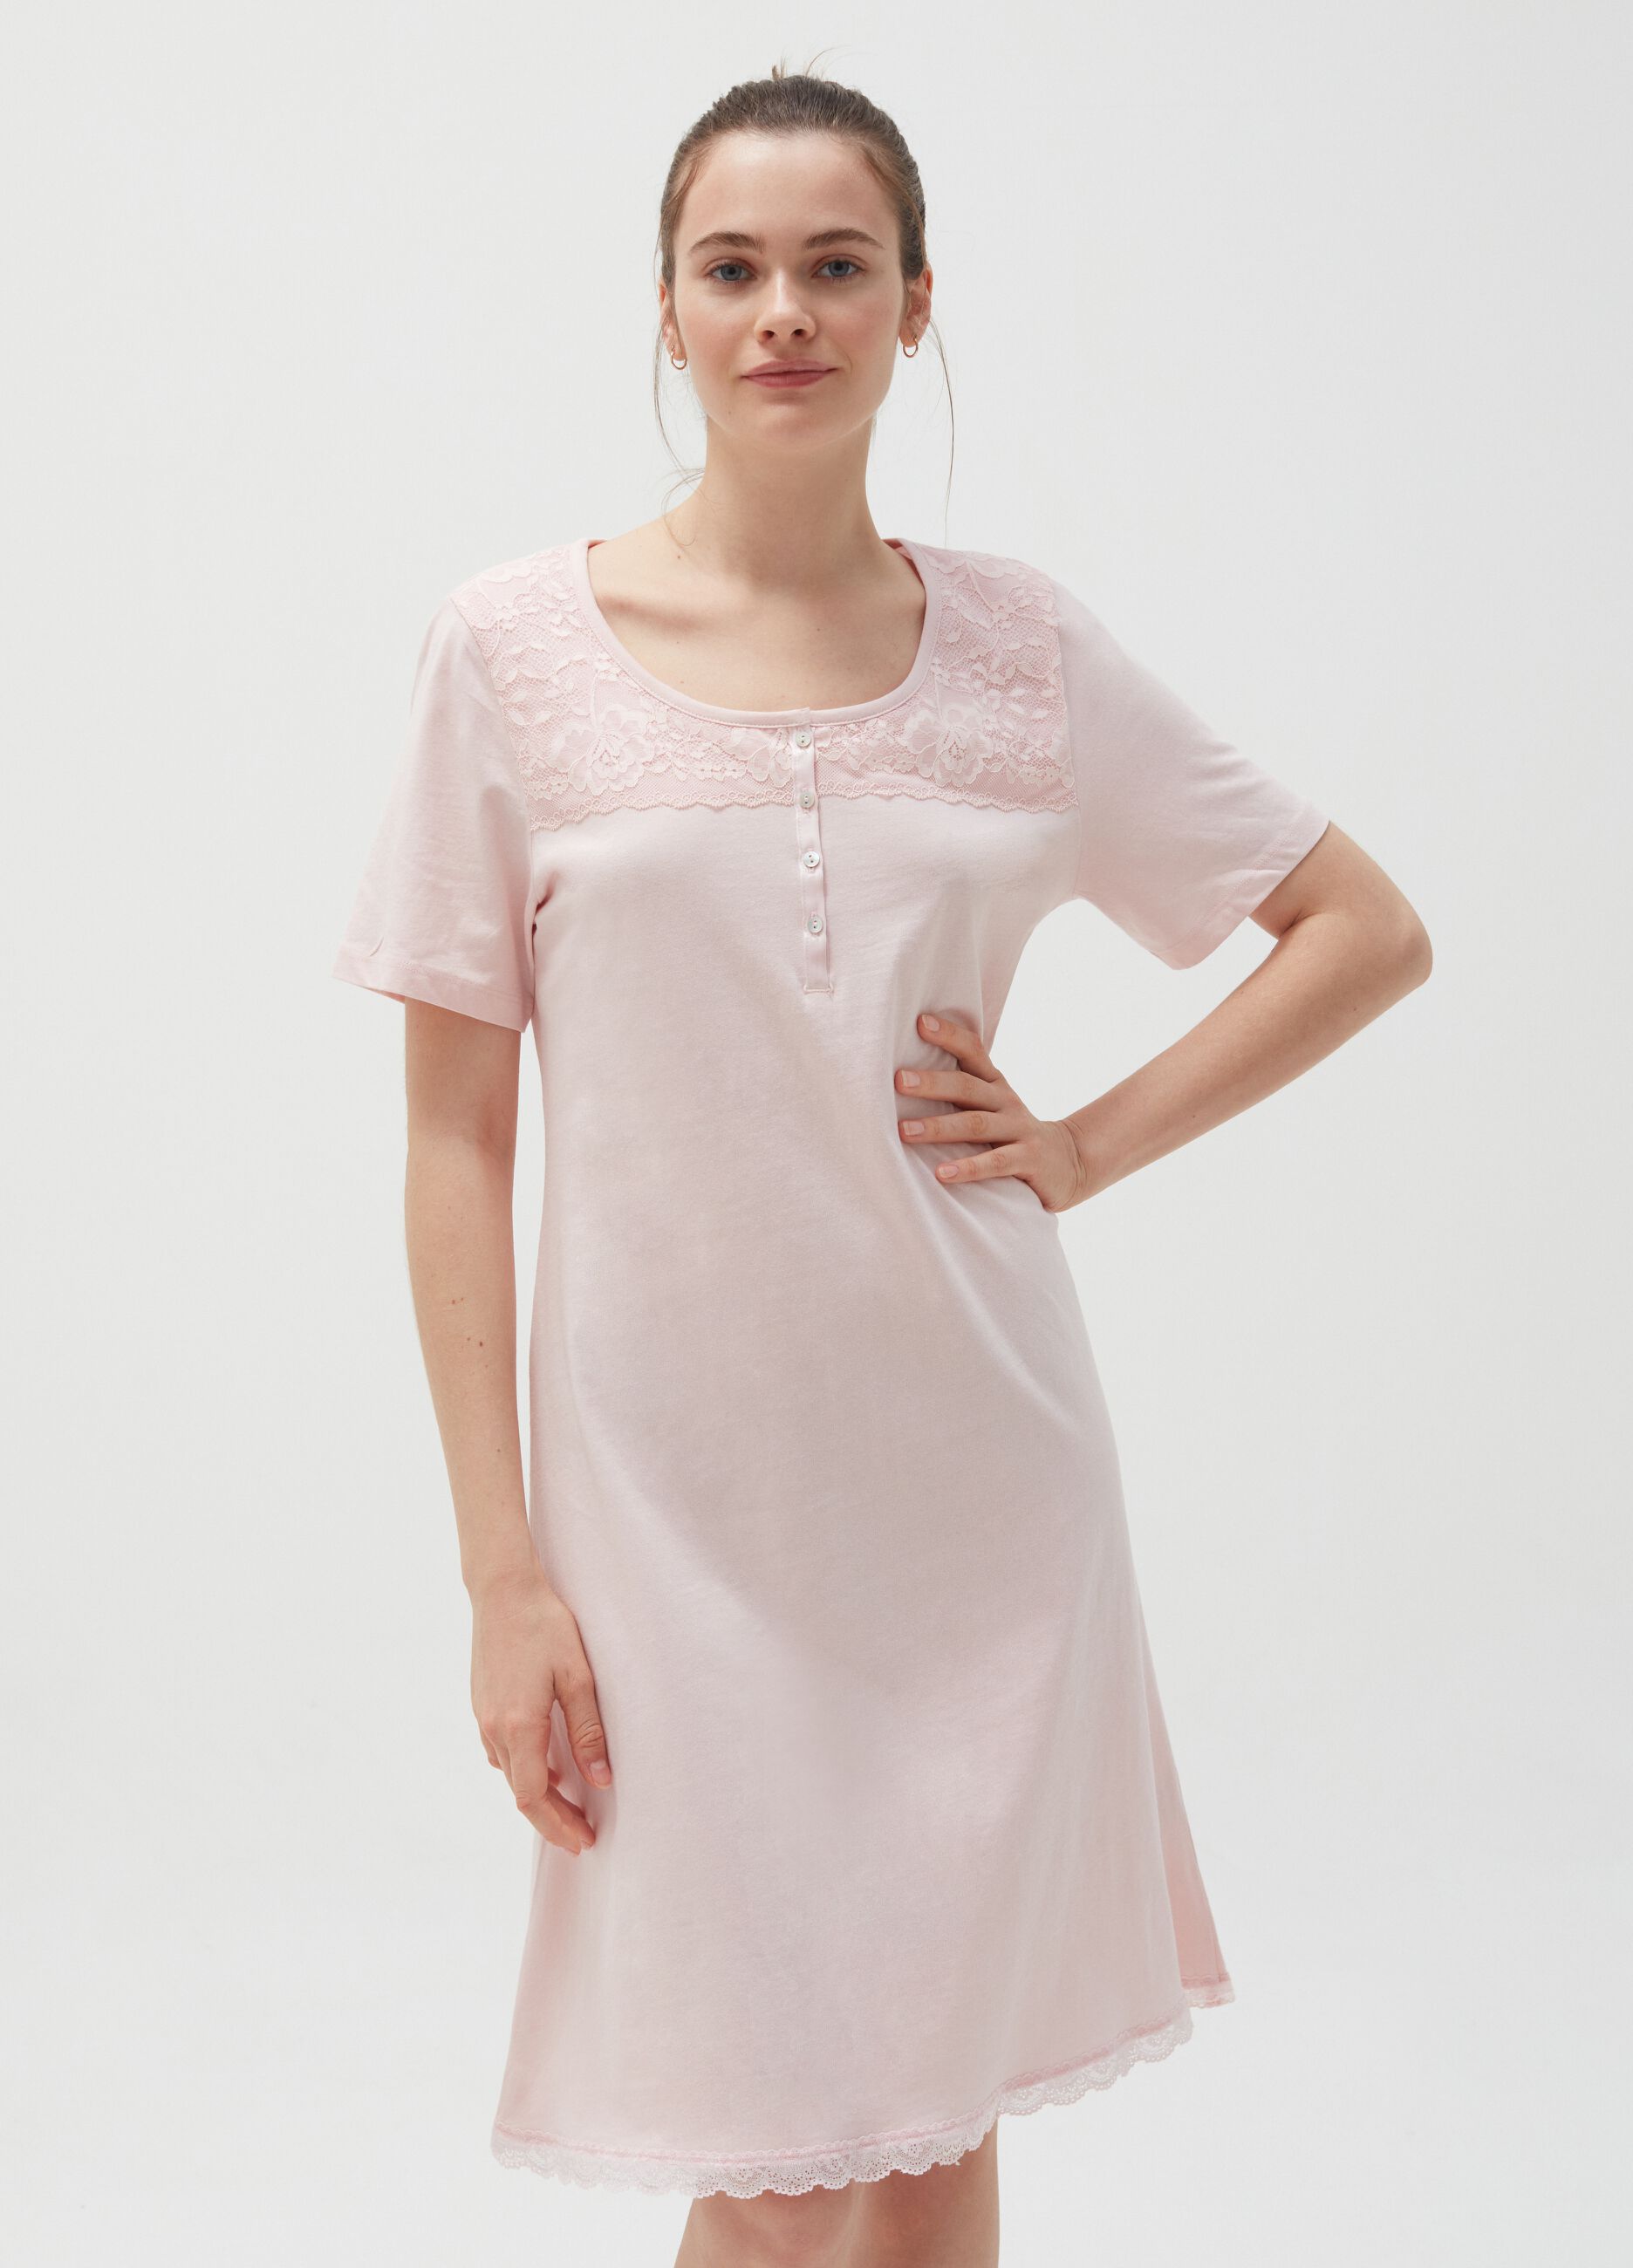 Cotton nightdress with lace insert